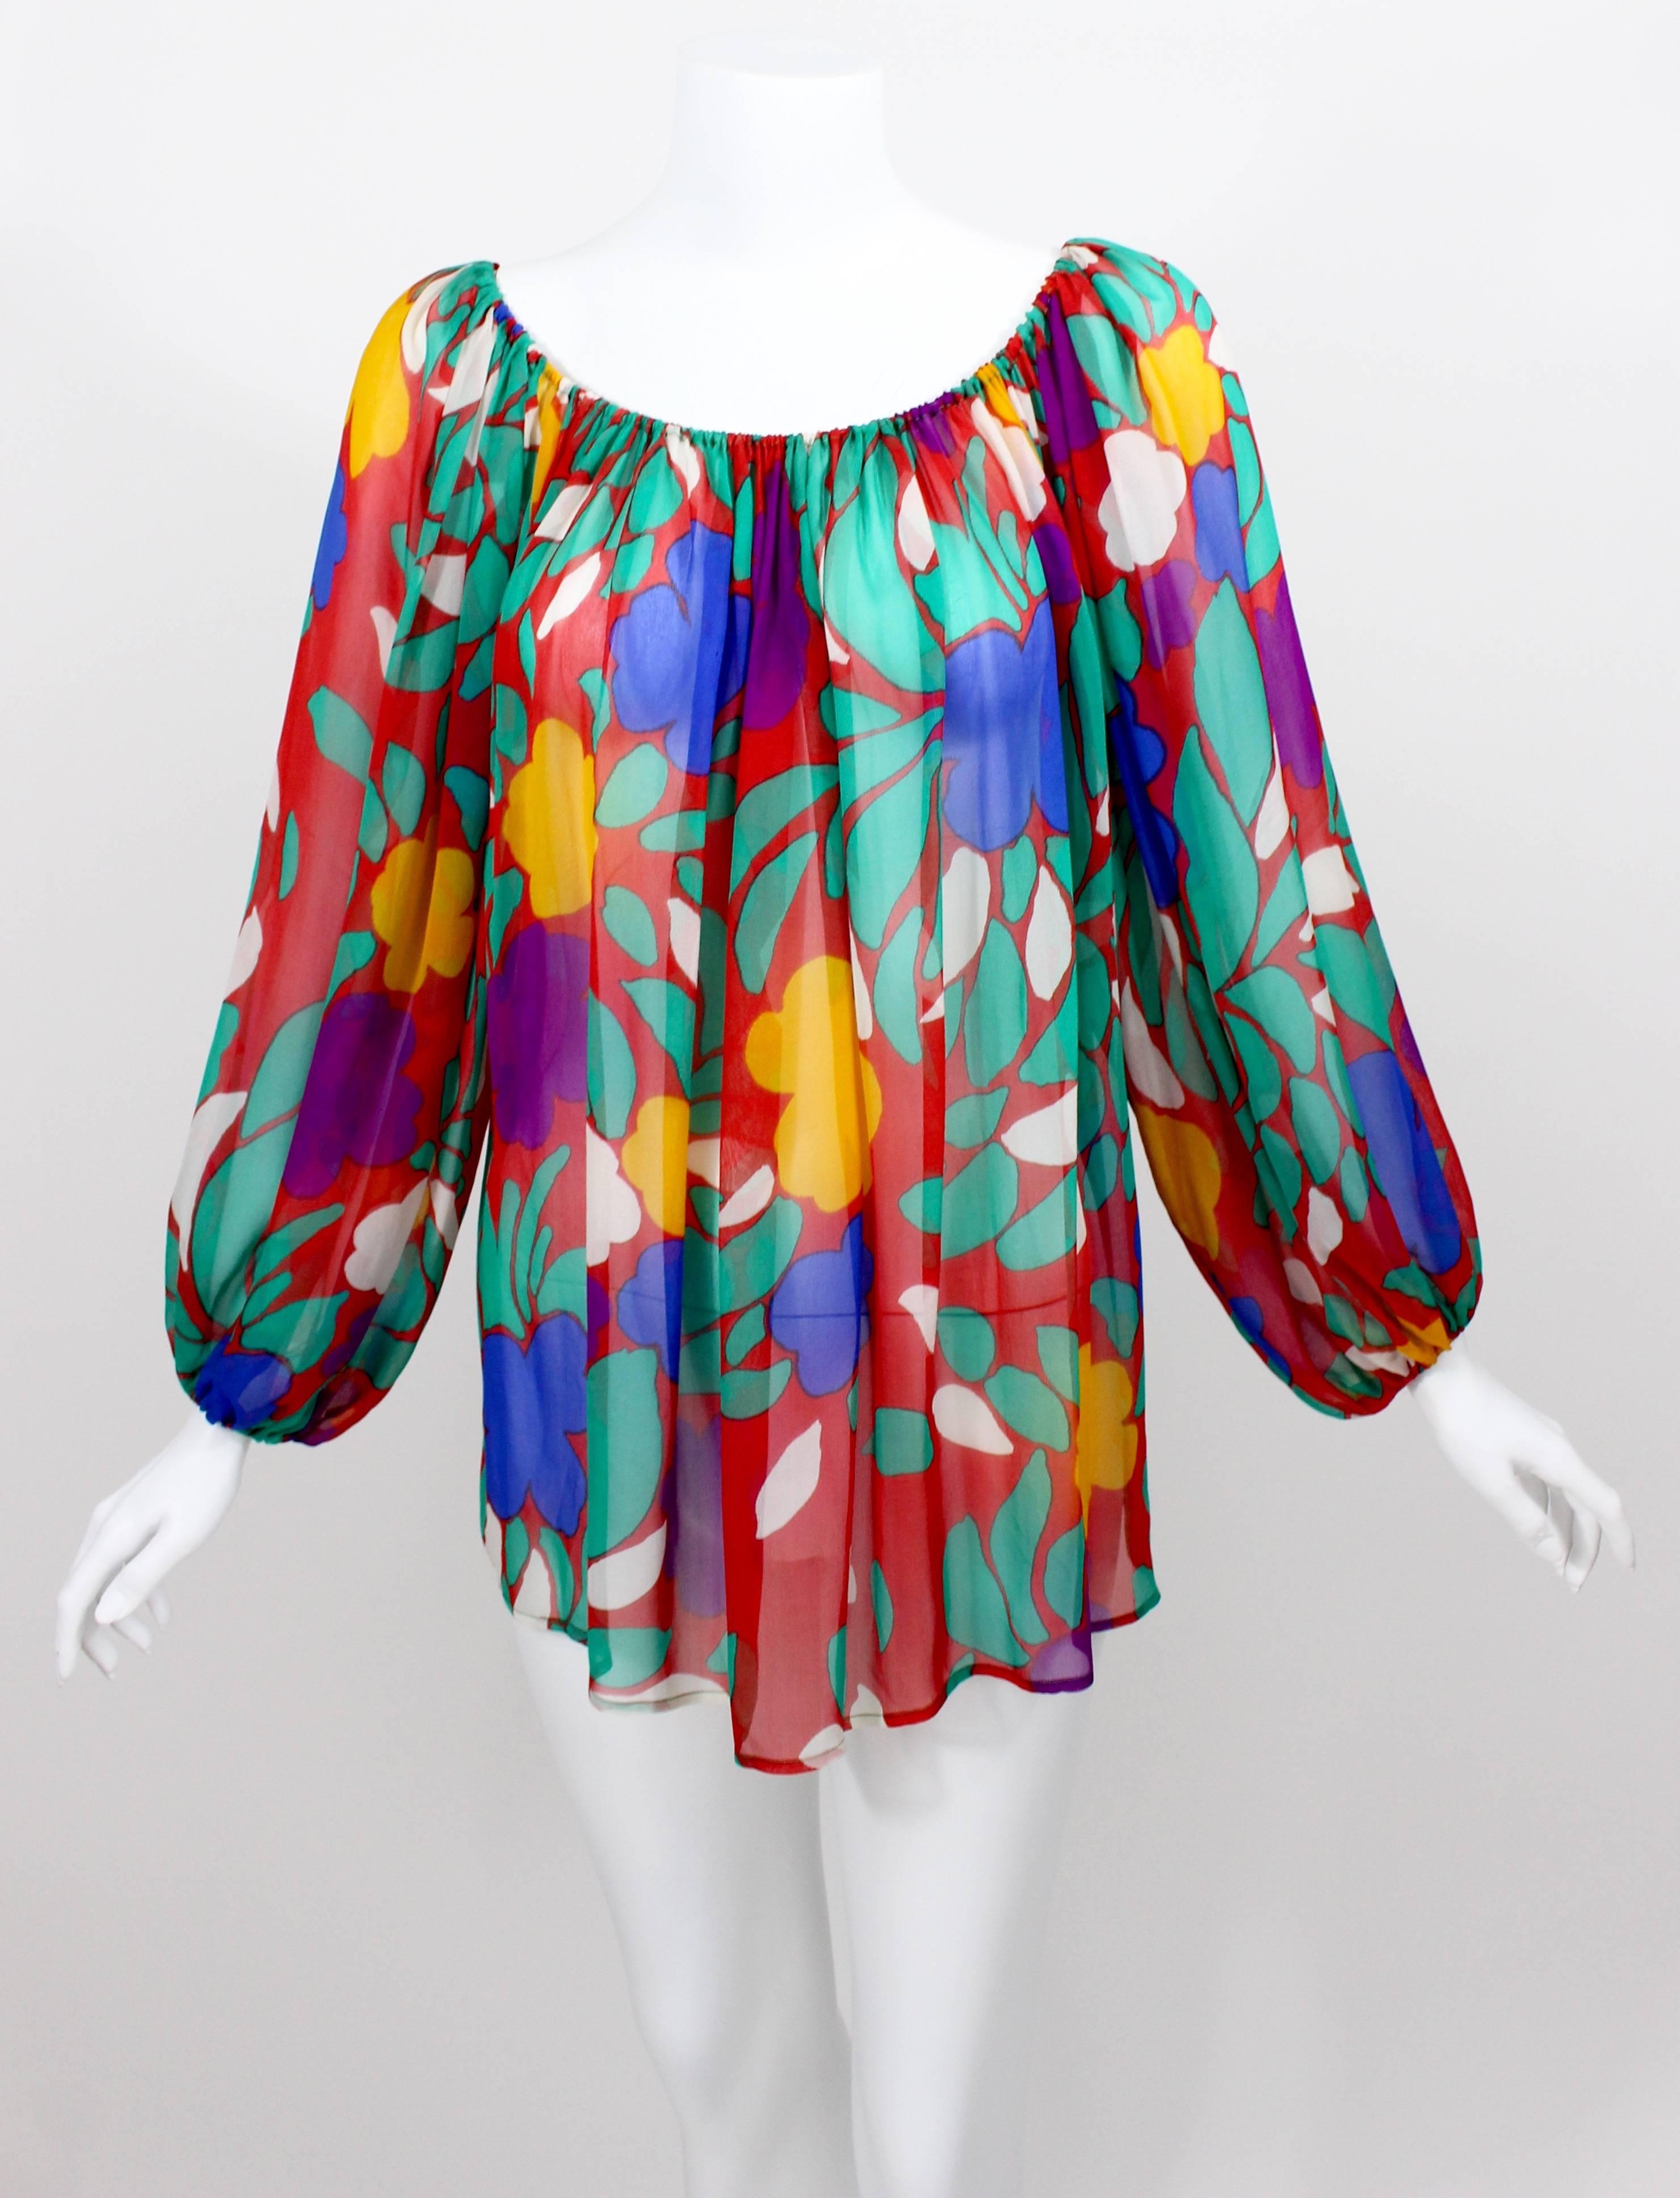 A print of tropical flowers in vibrant Pop Art colors makes this silk chiffon blouse designed by Yves Saint Laurent an amazing vintage find. Part of his spring/summer 1979 collection, it was positively captivating on the runway—a standout piece that